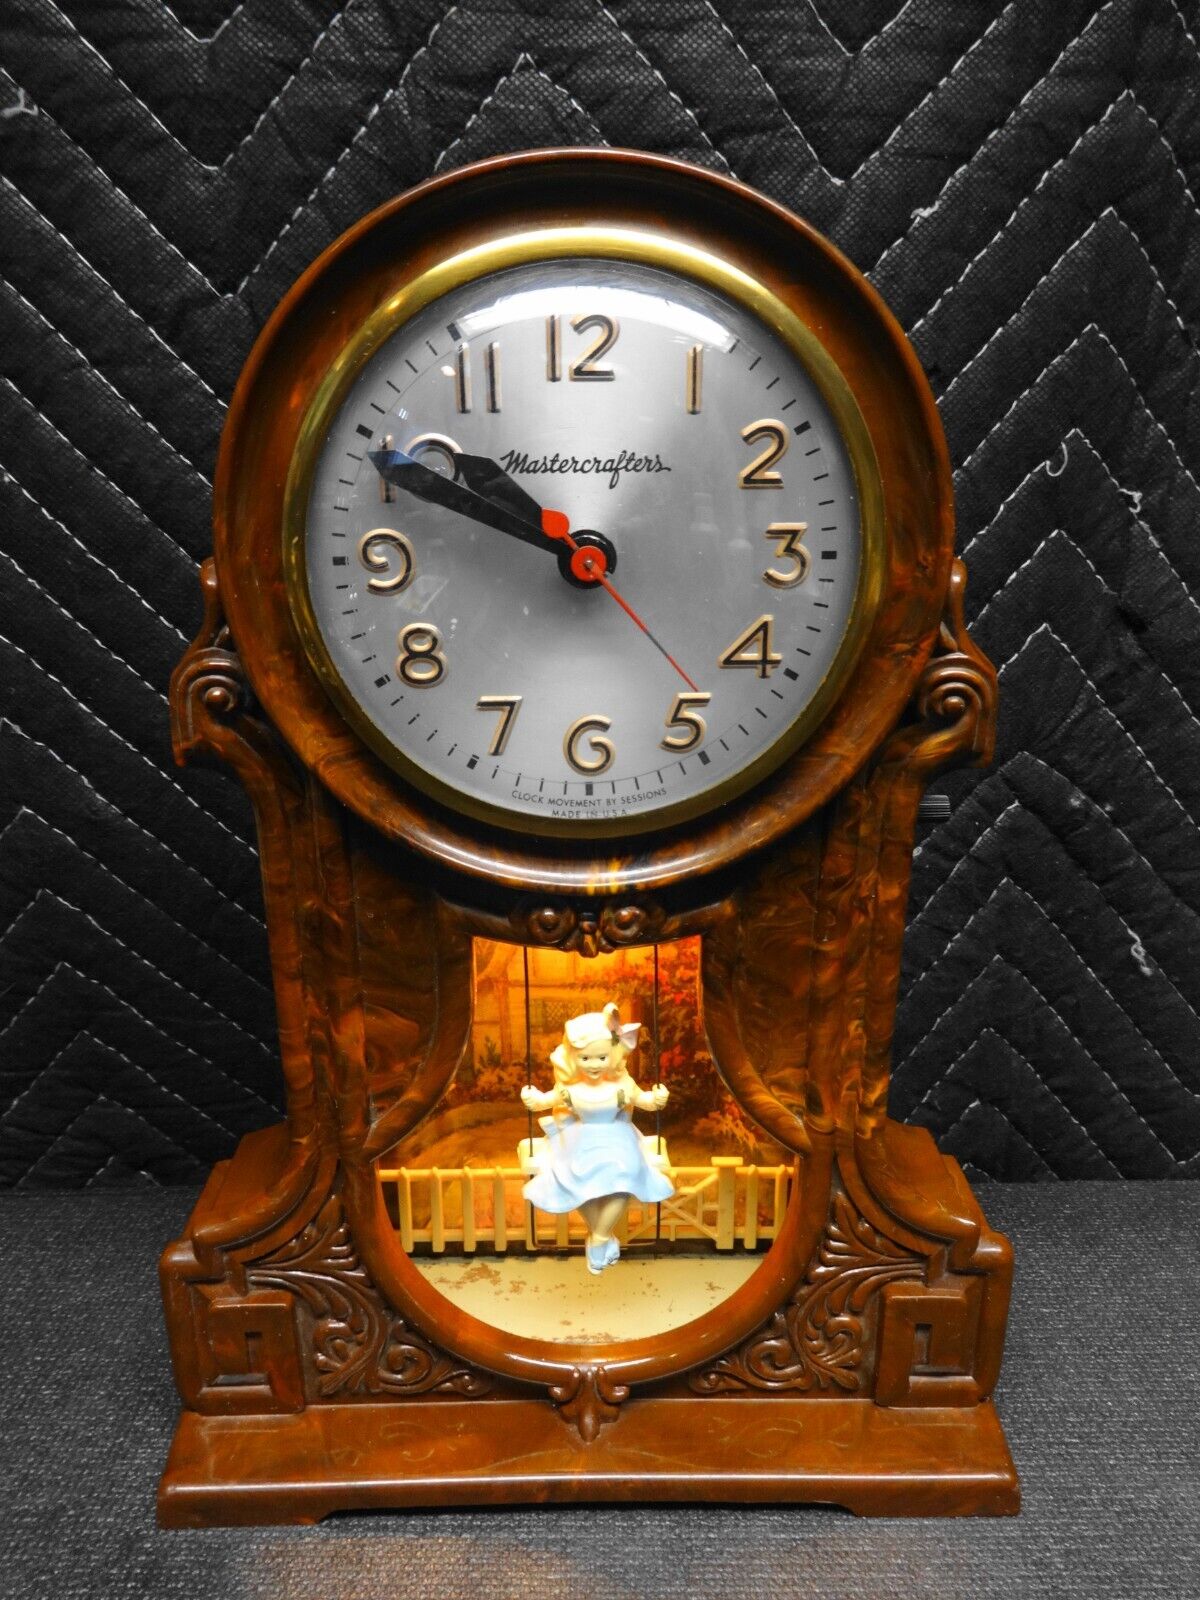 Mastercrafters Swinging Girl #119 Mantle Swing Time Electric Clock